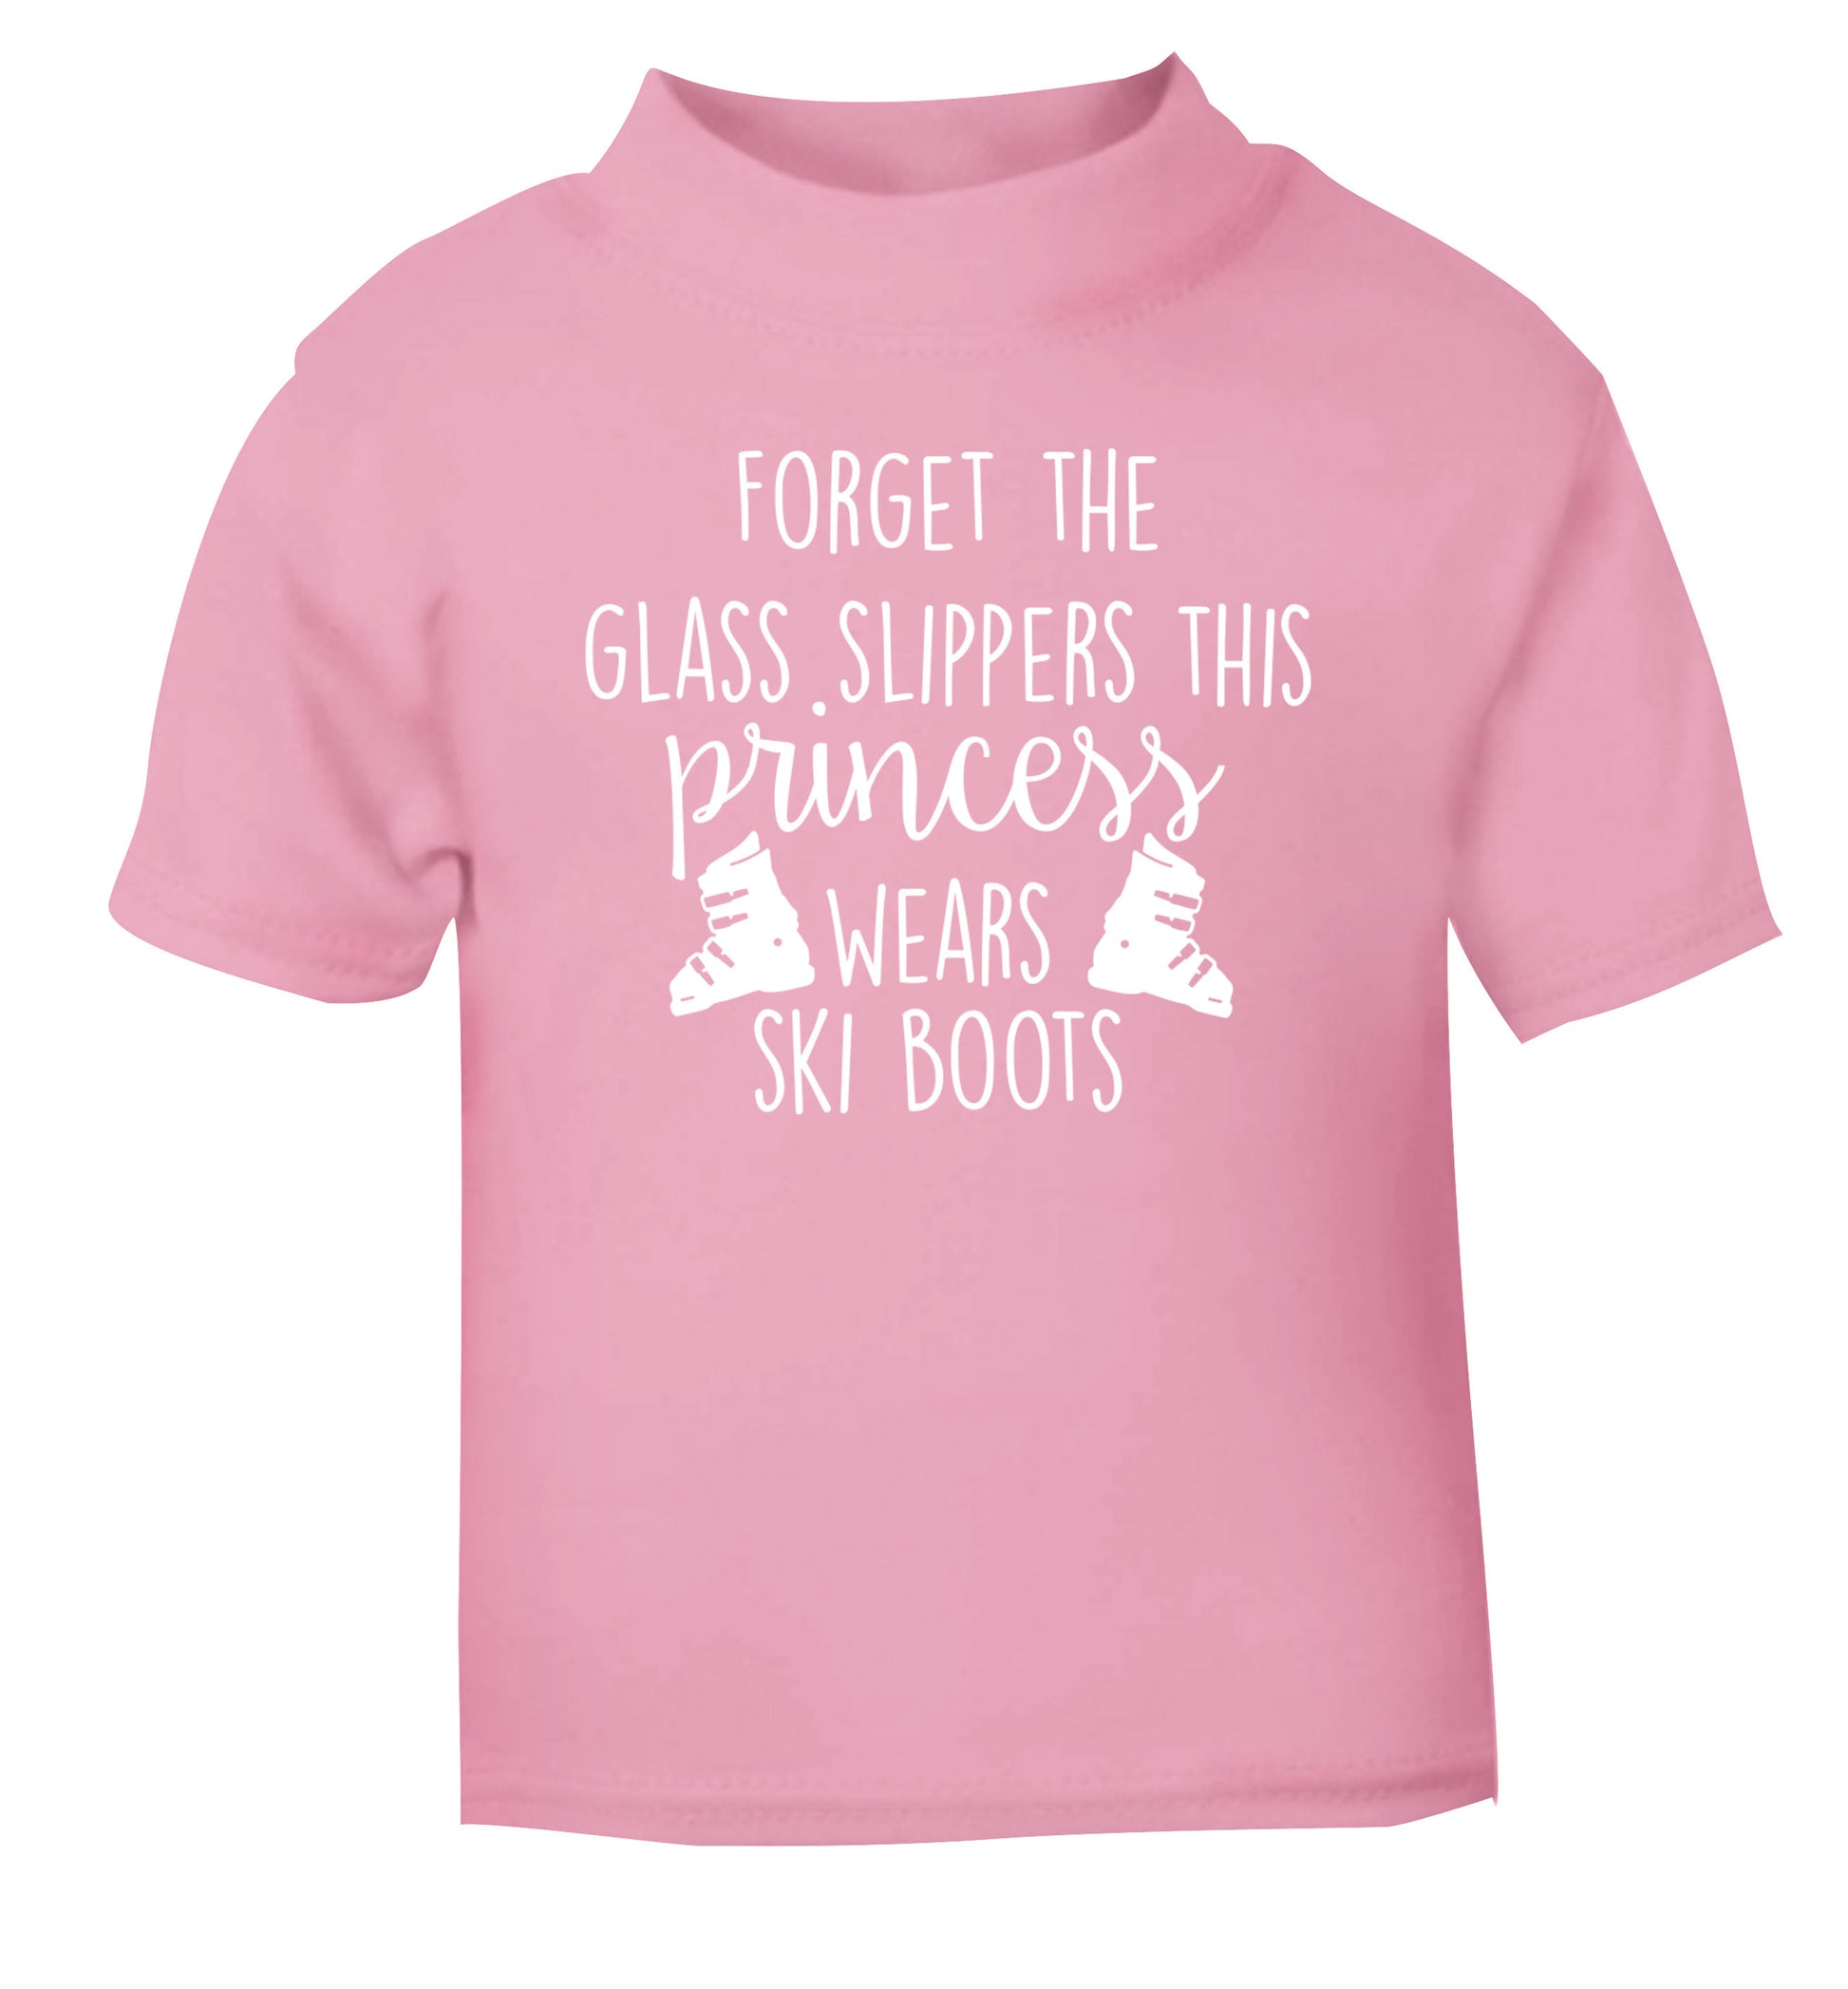 Forget the glass slippers this princess wears ski boots light pink Baby Toddler Tshirt 2 Years